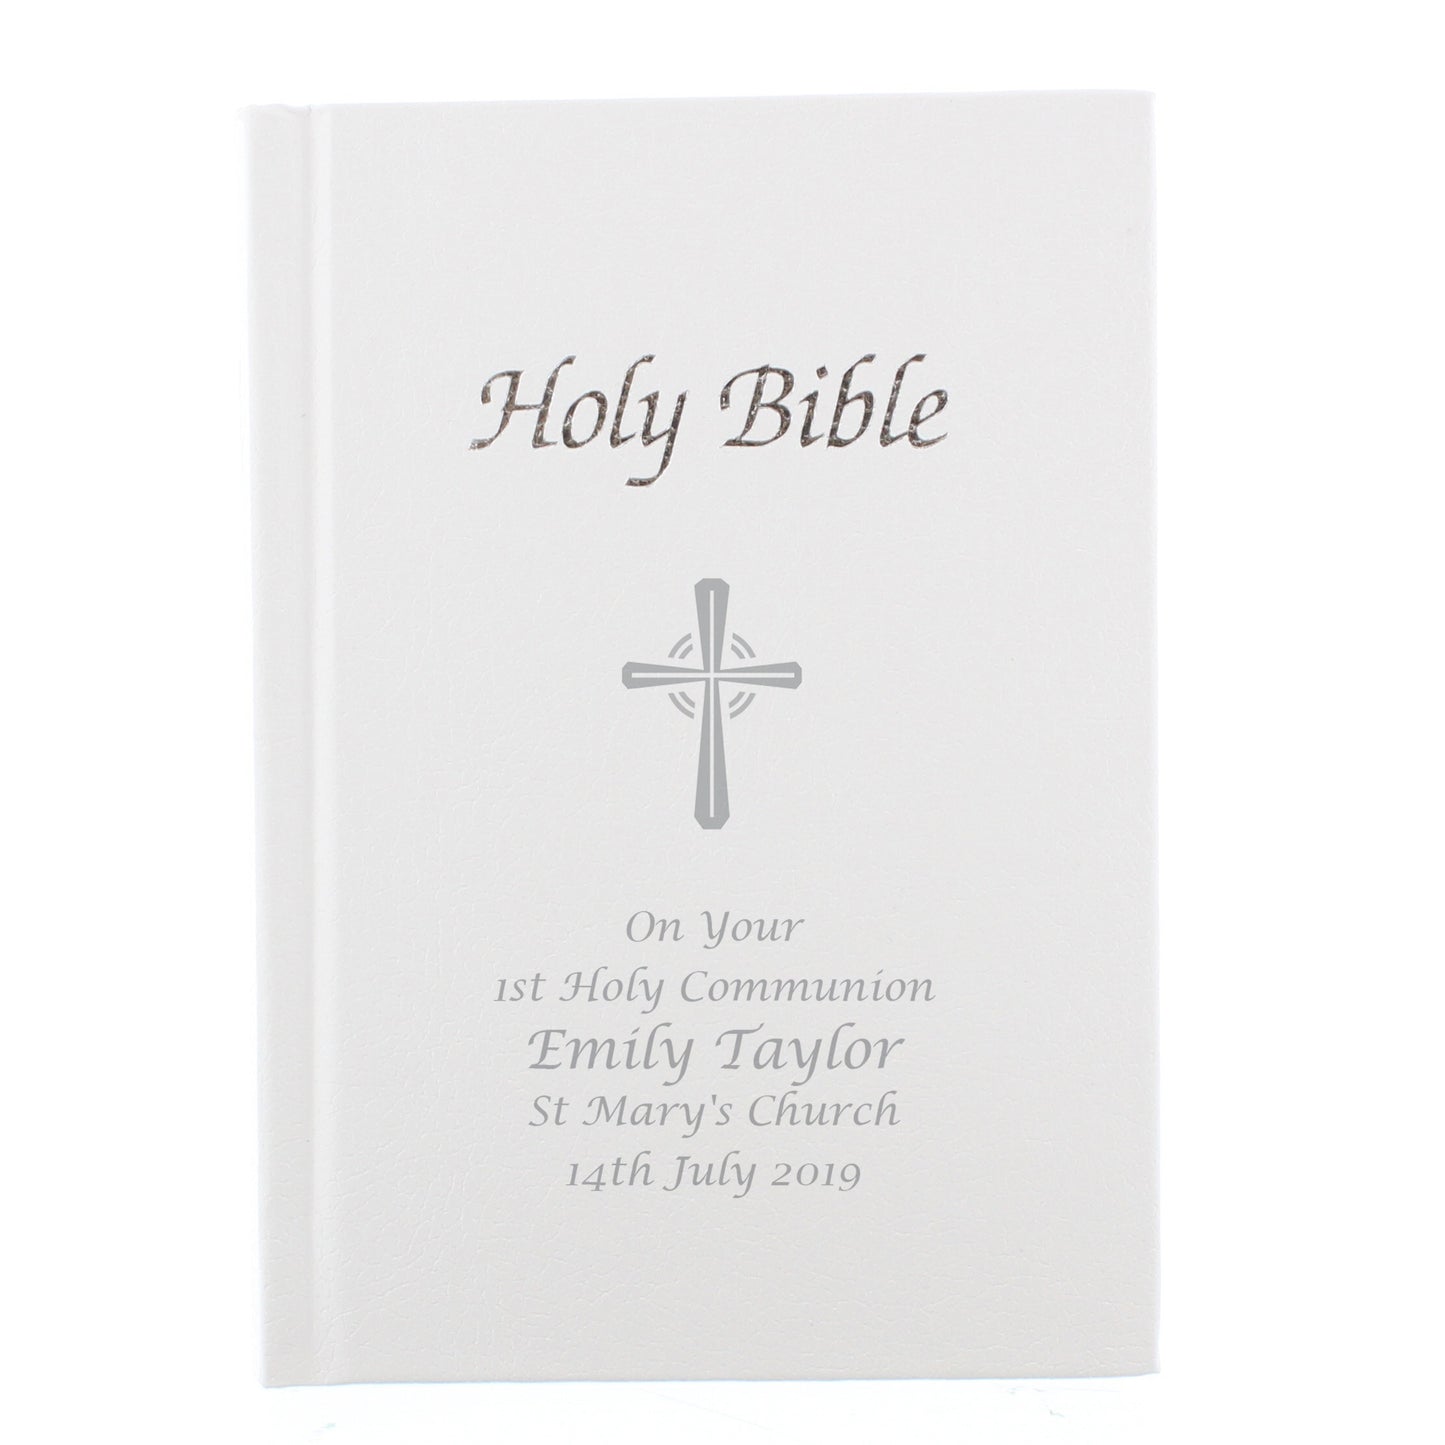 Personalised Holy Bible - Personalise It!